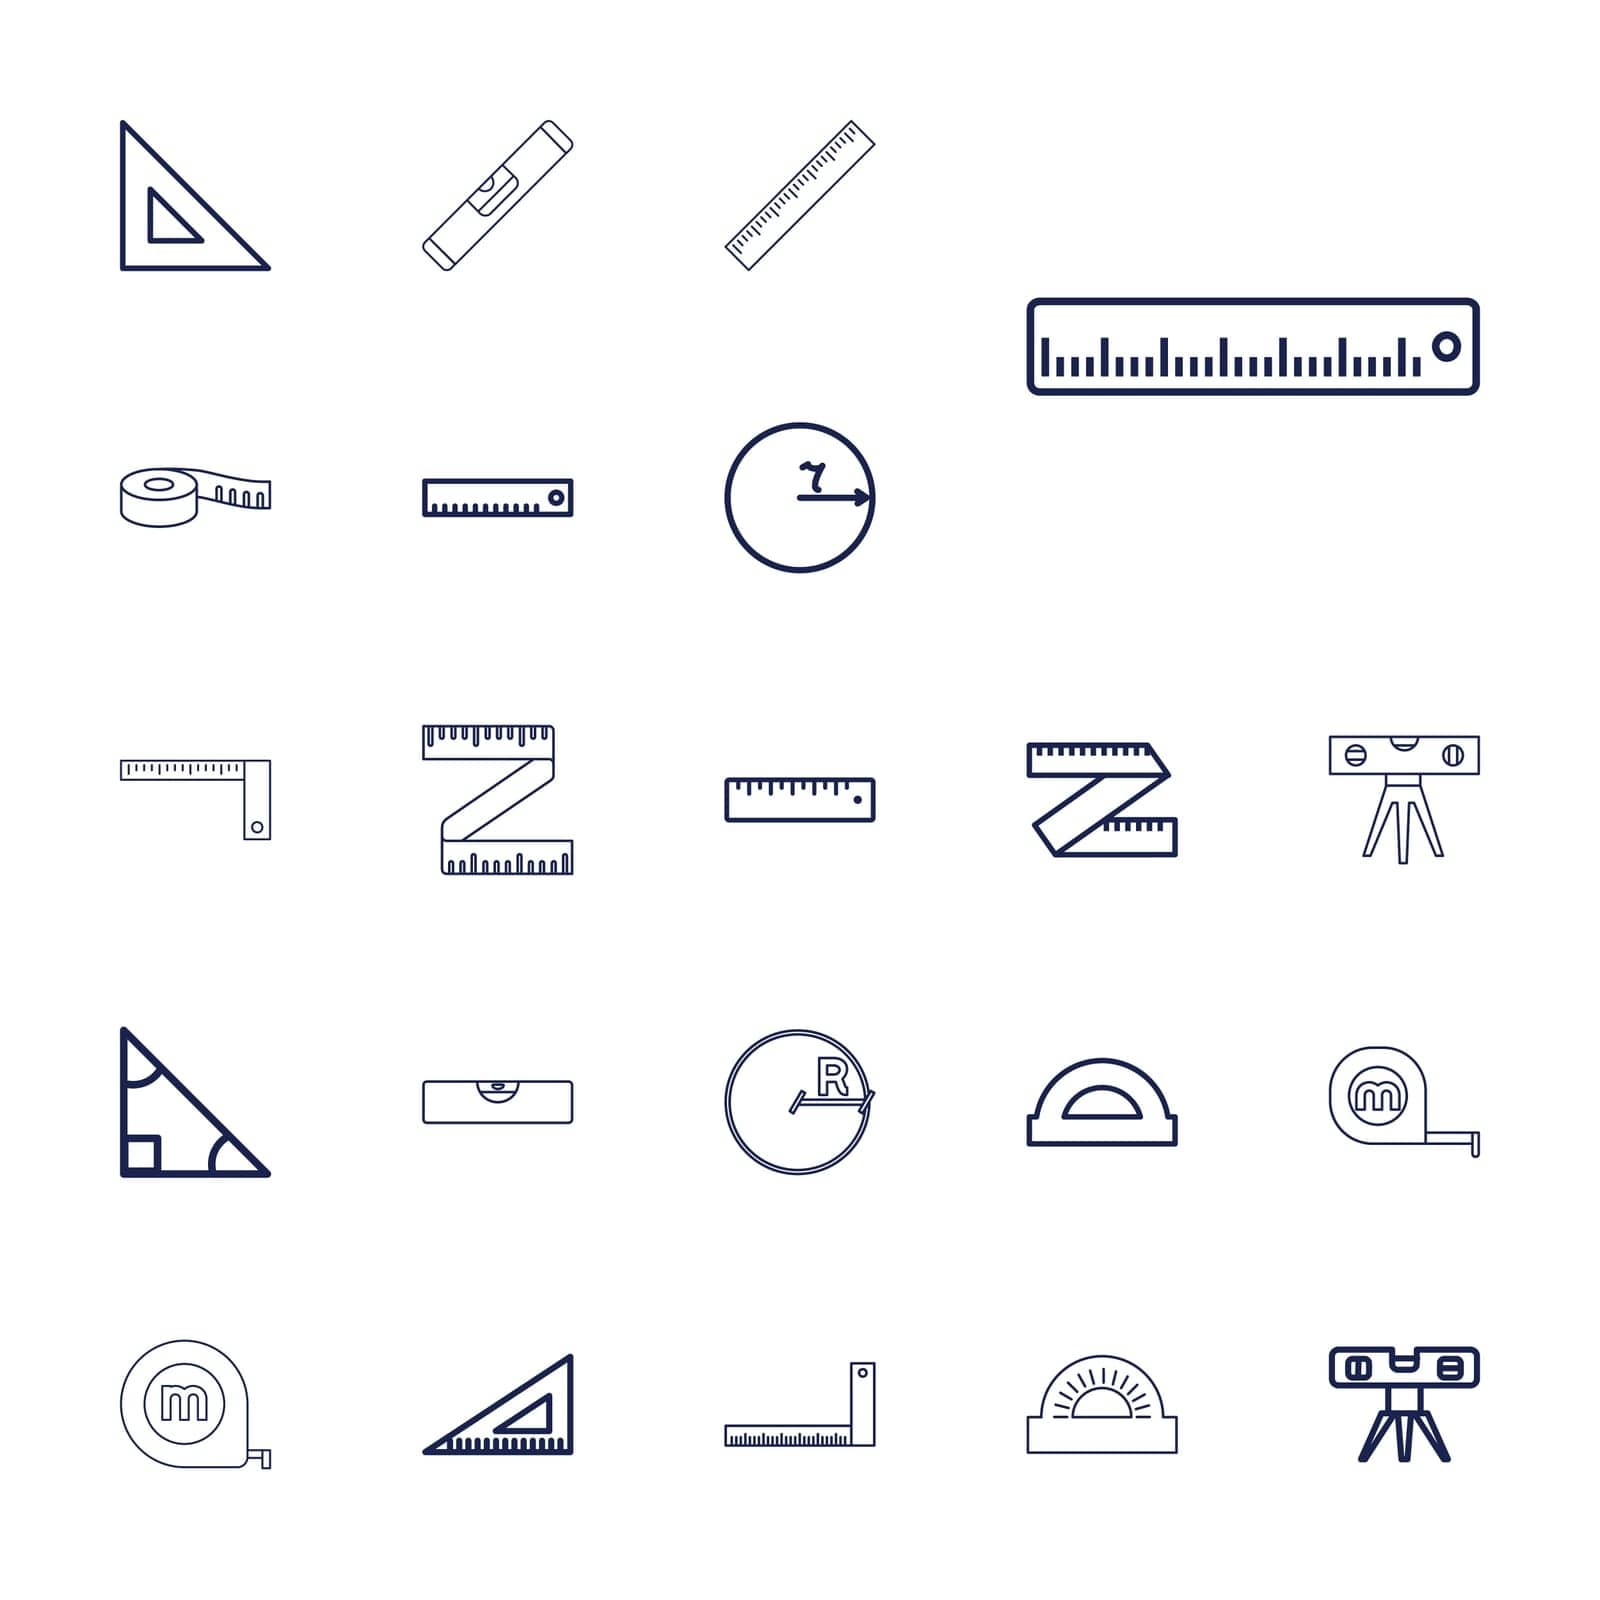 symbol,measuring,education,mathematics,line,concept,icon,sign,isolated,instrument,ruler,triangle,measurement,white,tape,school,web,flat,design,drawing,construction,vector,set,shape,level,black,length,equipment,tool,measure,size,protractor,background,geometric,geometry,illustration,circle,object